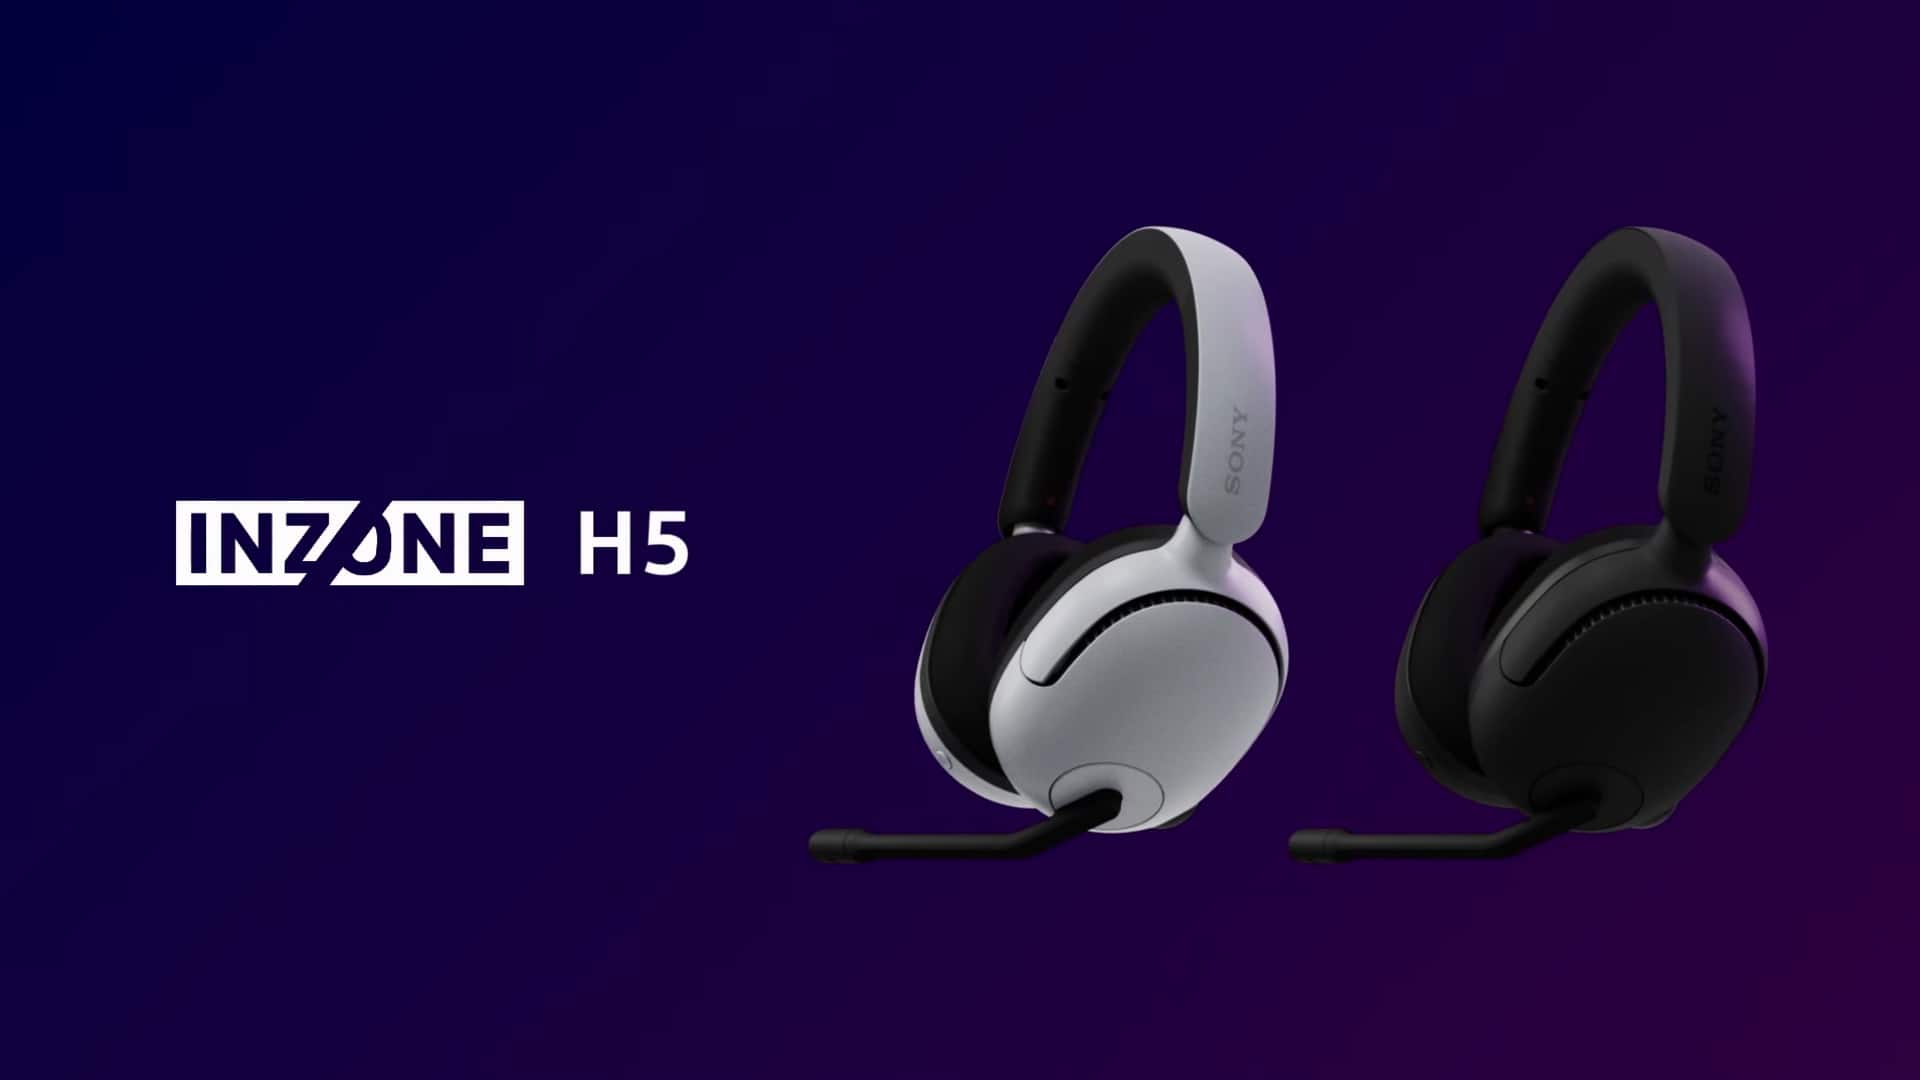 Sony launches INZONE H5 gaming headset in India: Check features